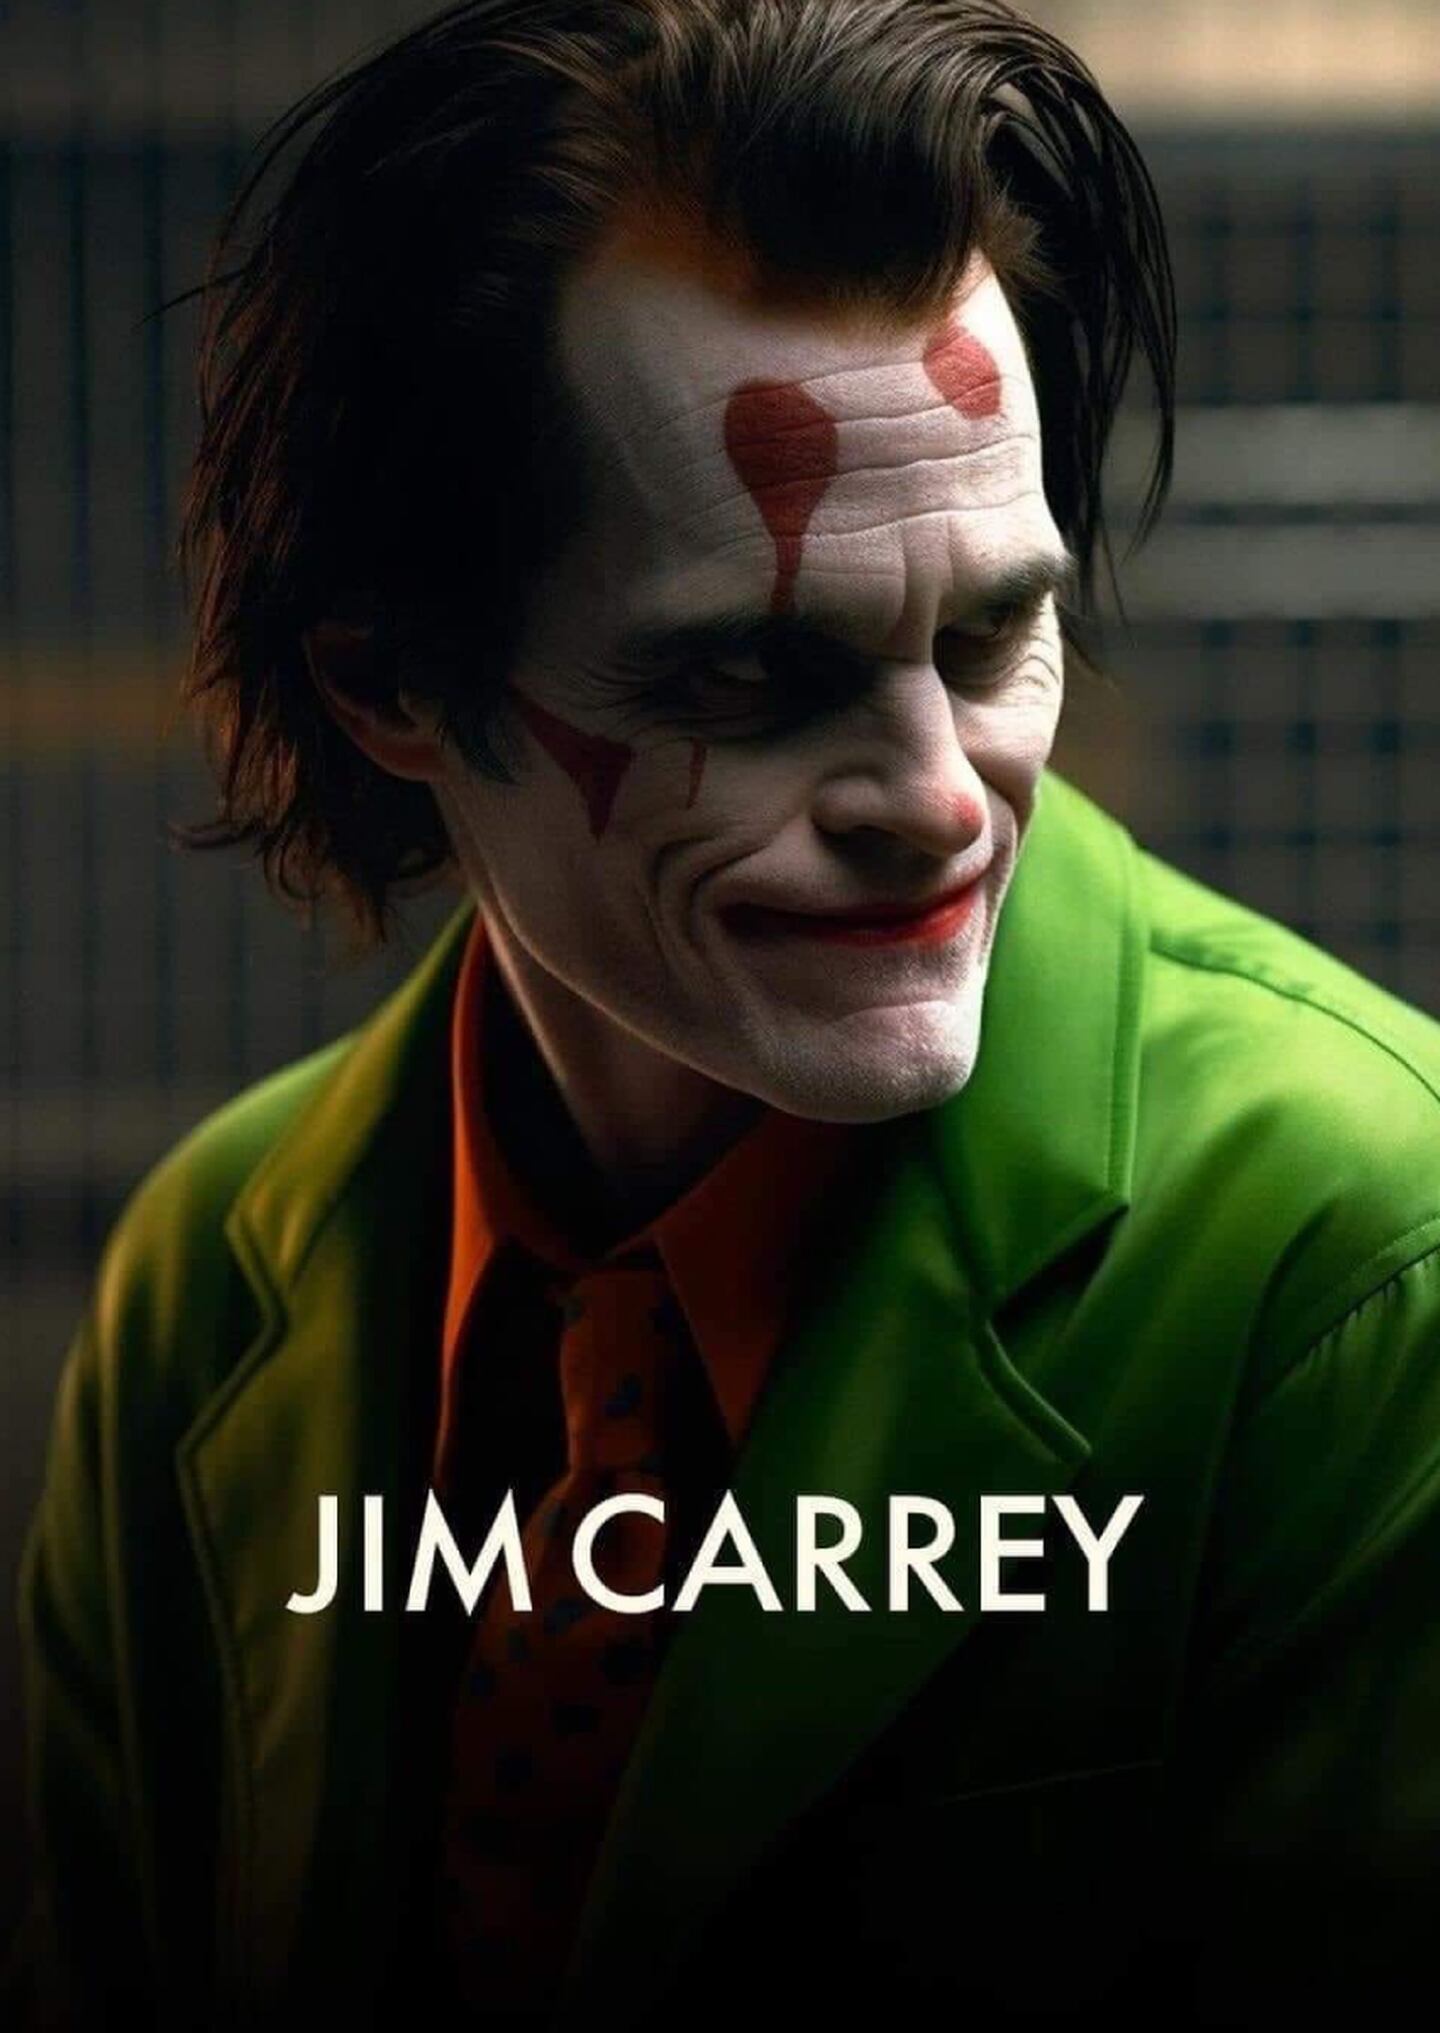 One of the greatest comedians of all time would look like this if he played the Joker, according to the AI